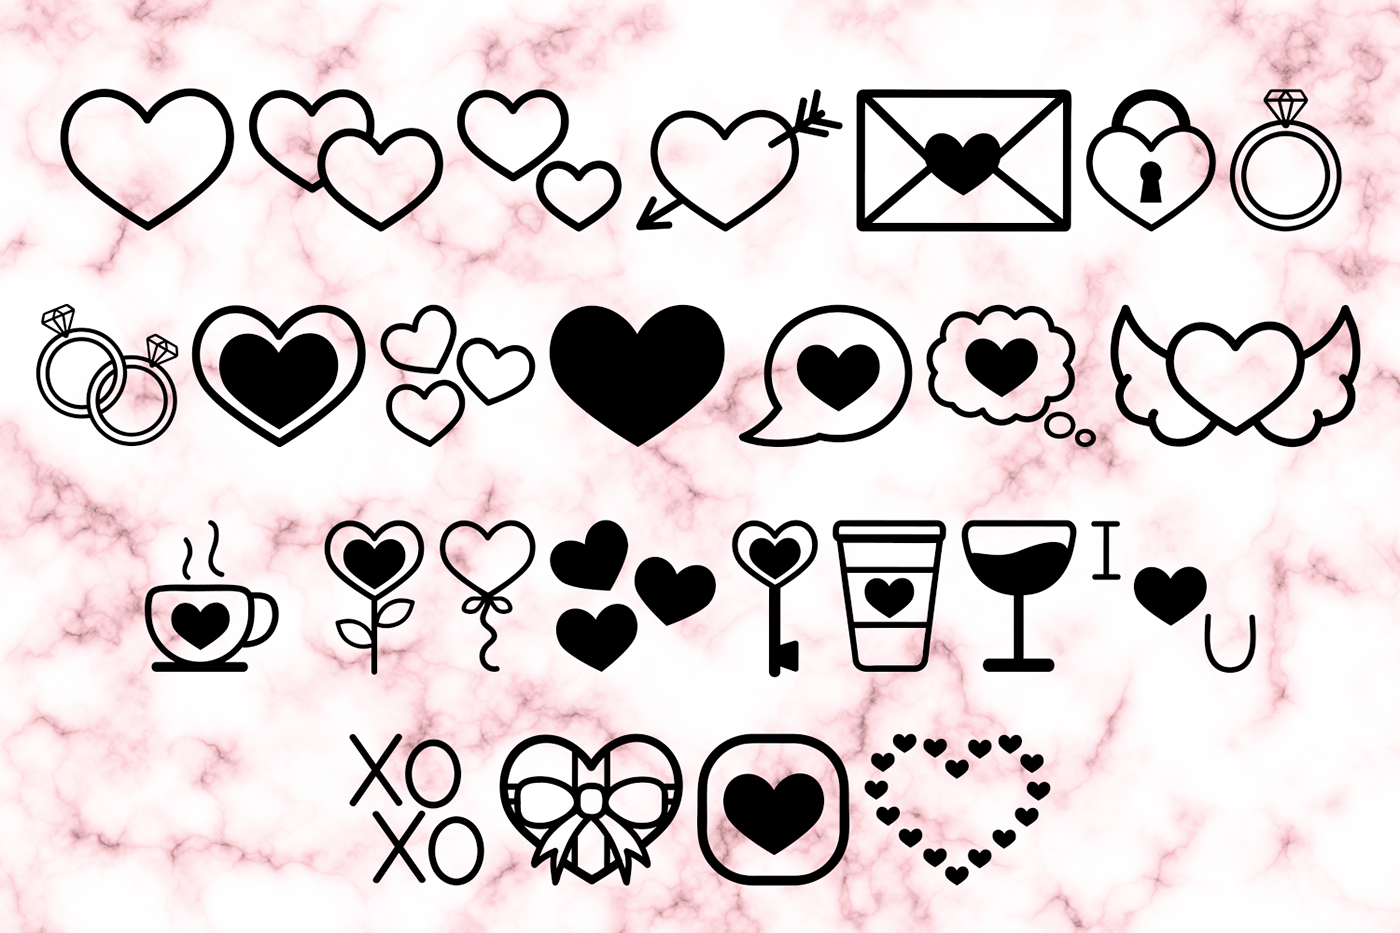 Dingbats font with hearts, letter and cute references.